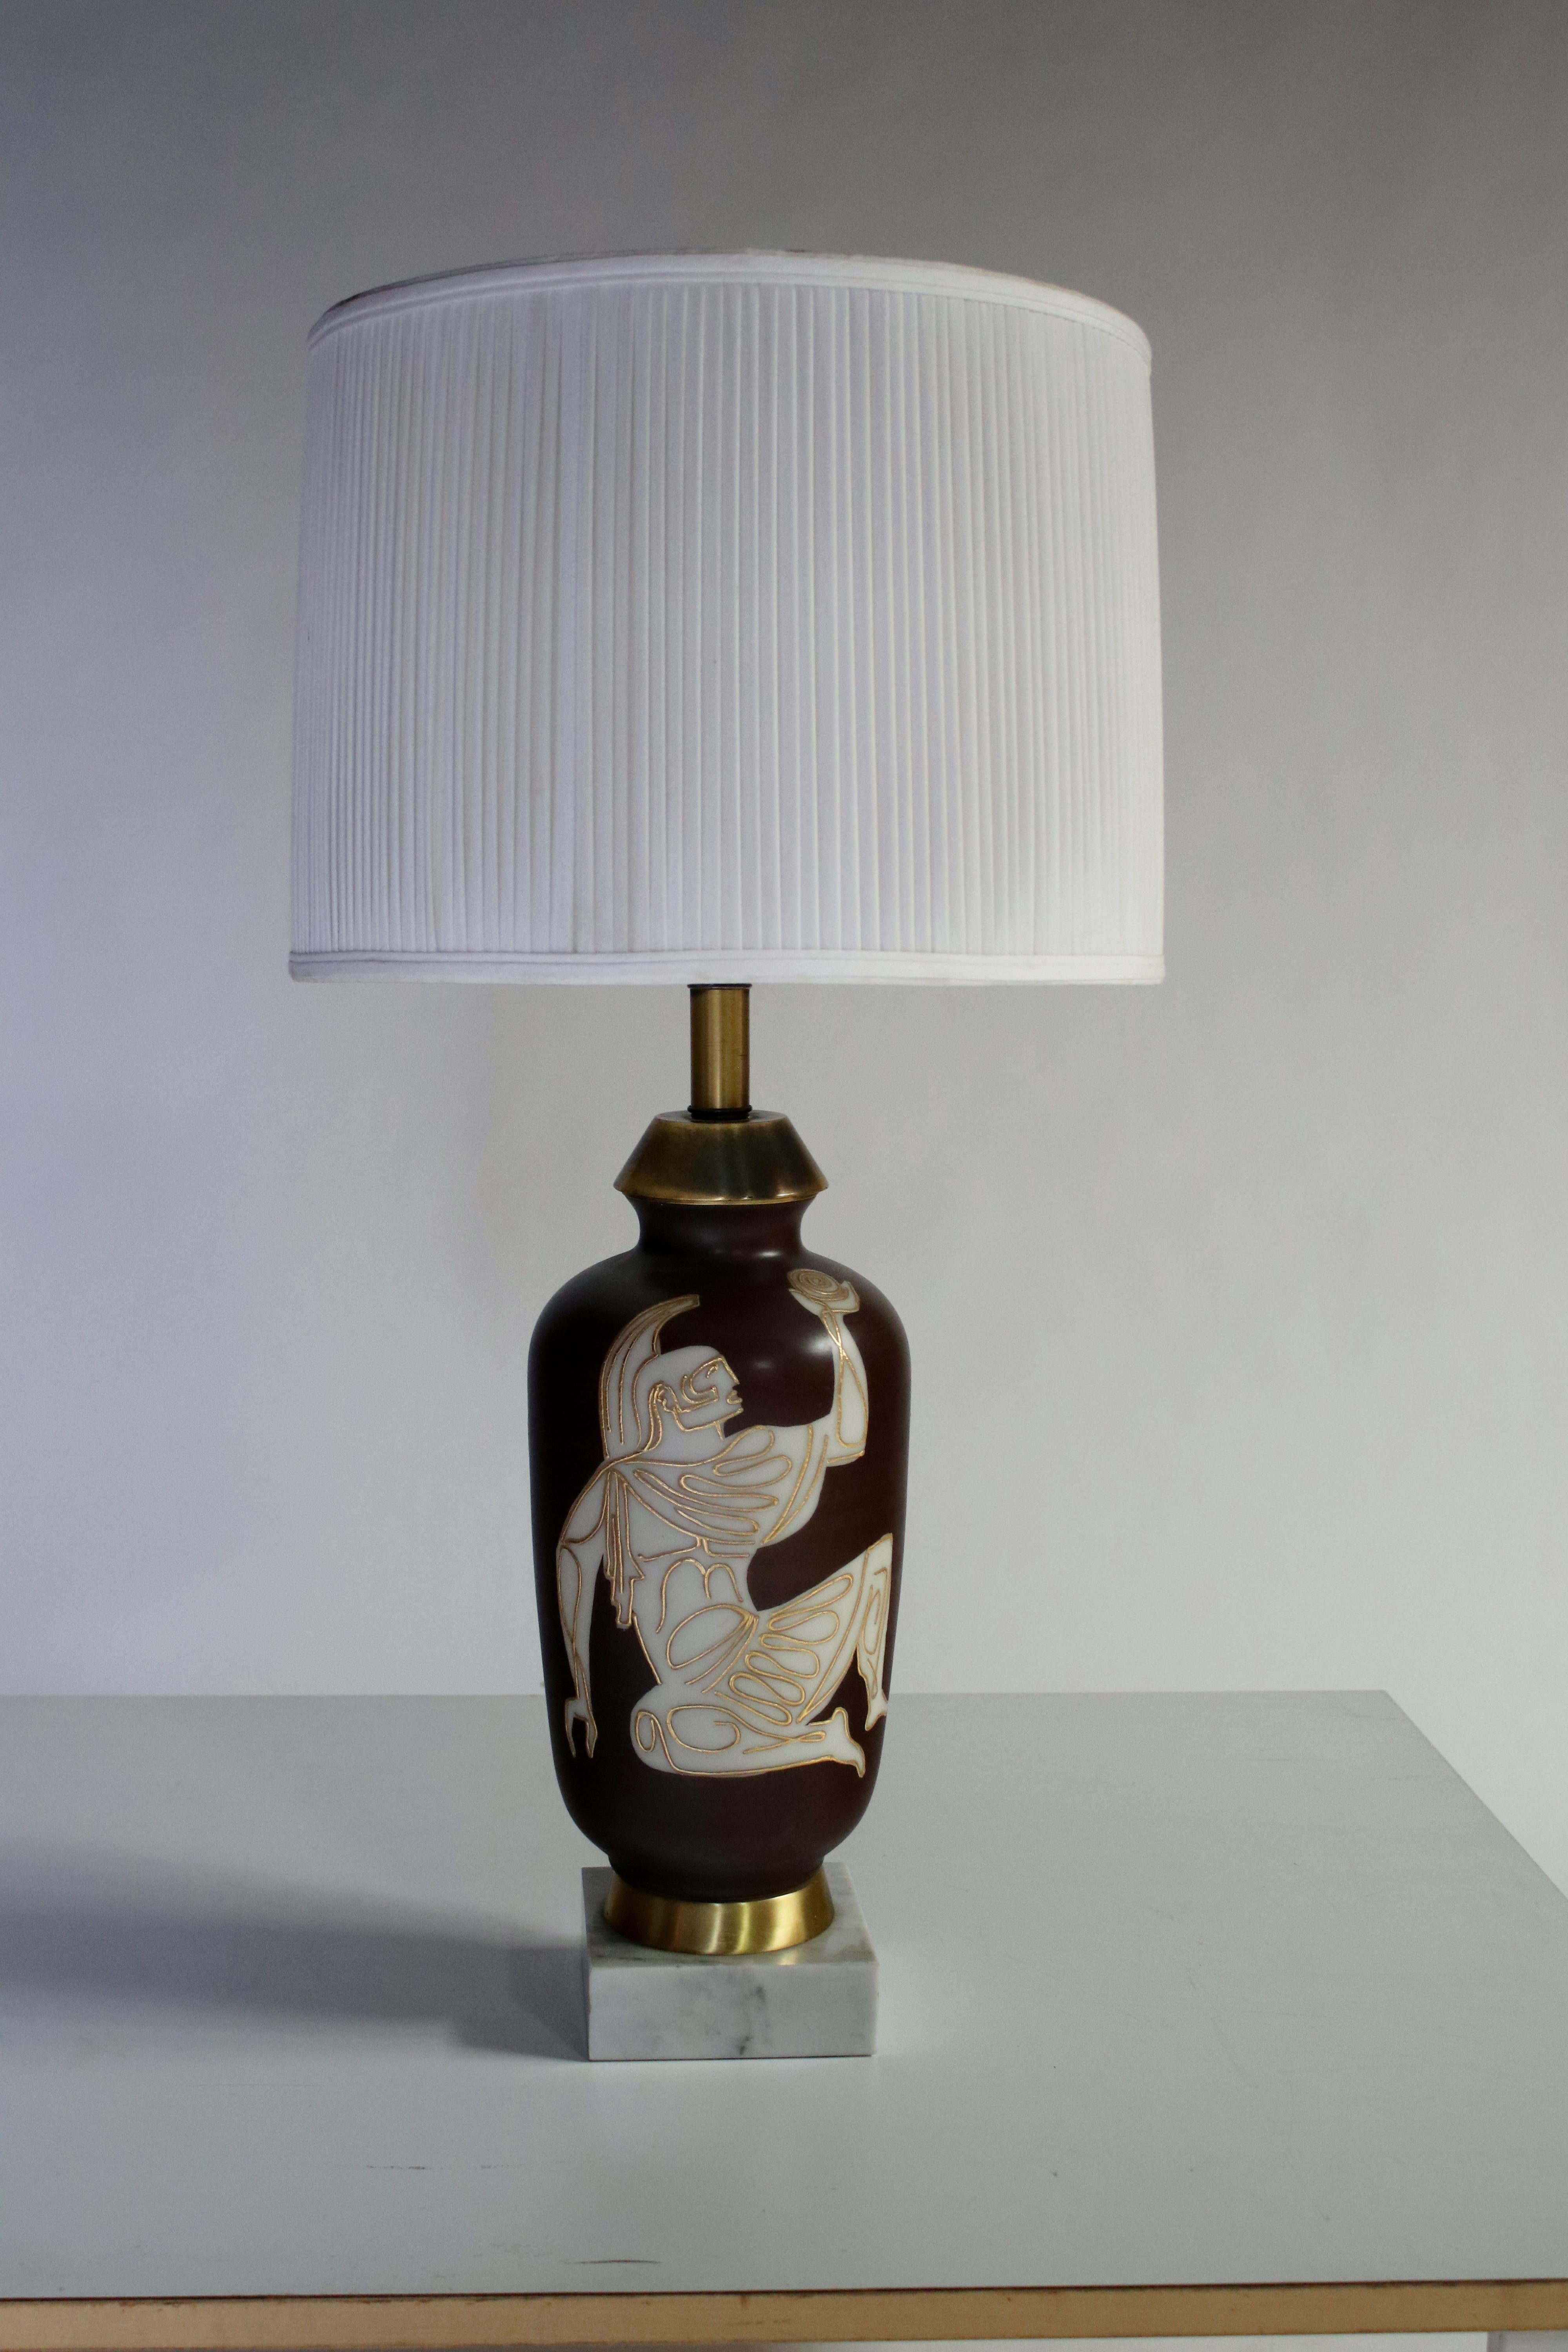 Unique mid-century table lamp depicting a Roman gladiator motif with ancient symbols on a brown glazed urn. Lamp is mounted on a thick marble plinth with brushed brass accents. Shade not included.